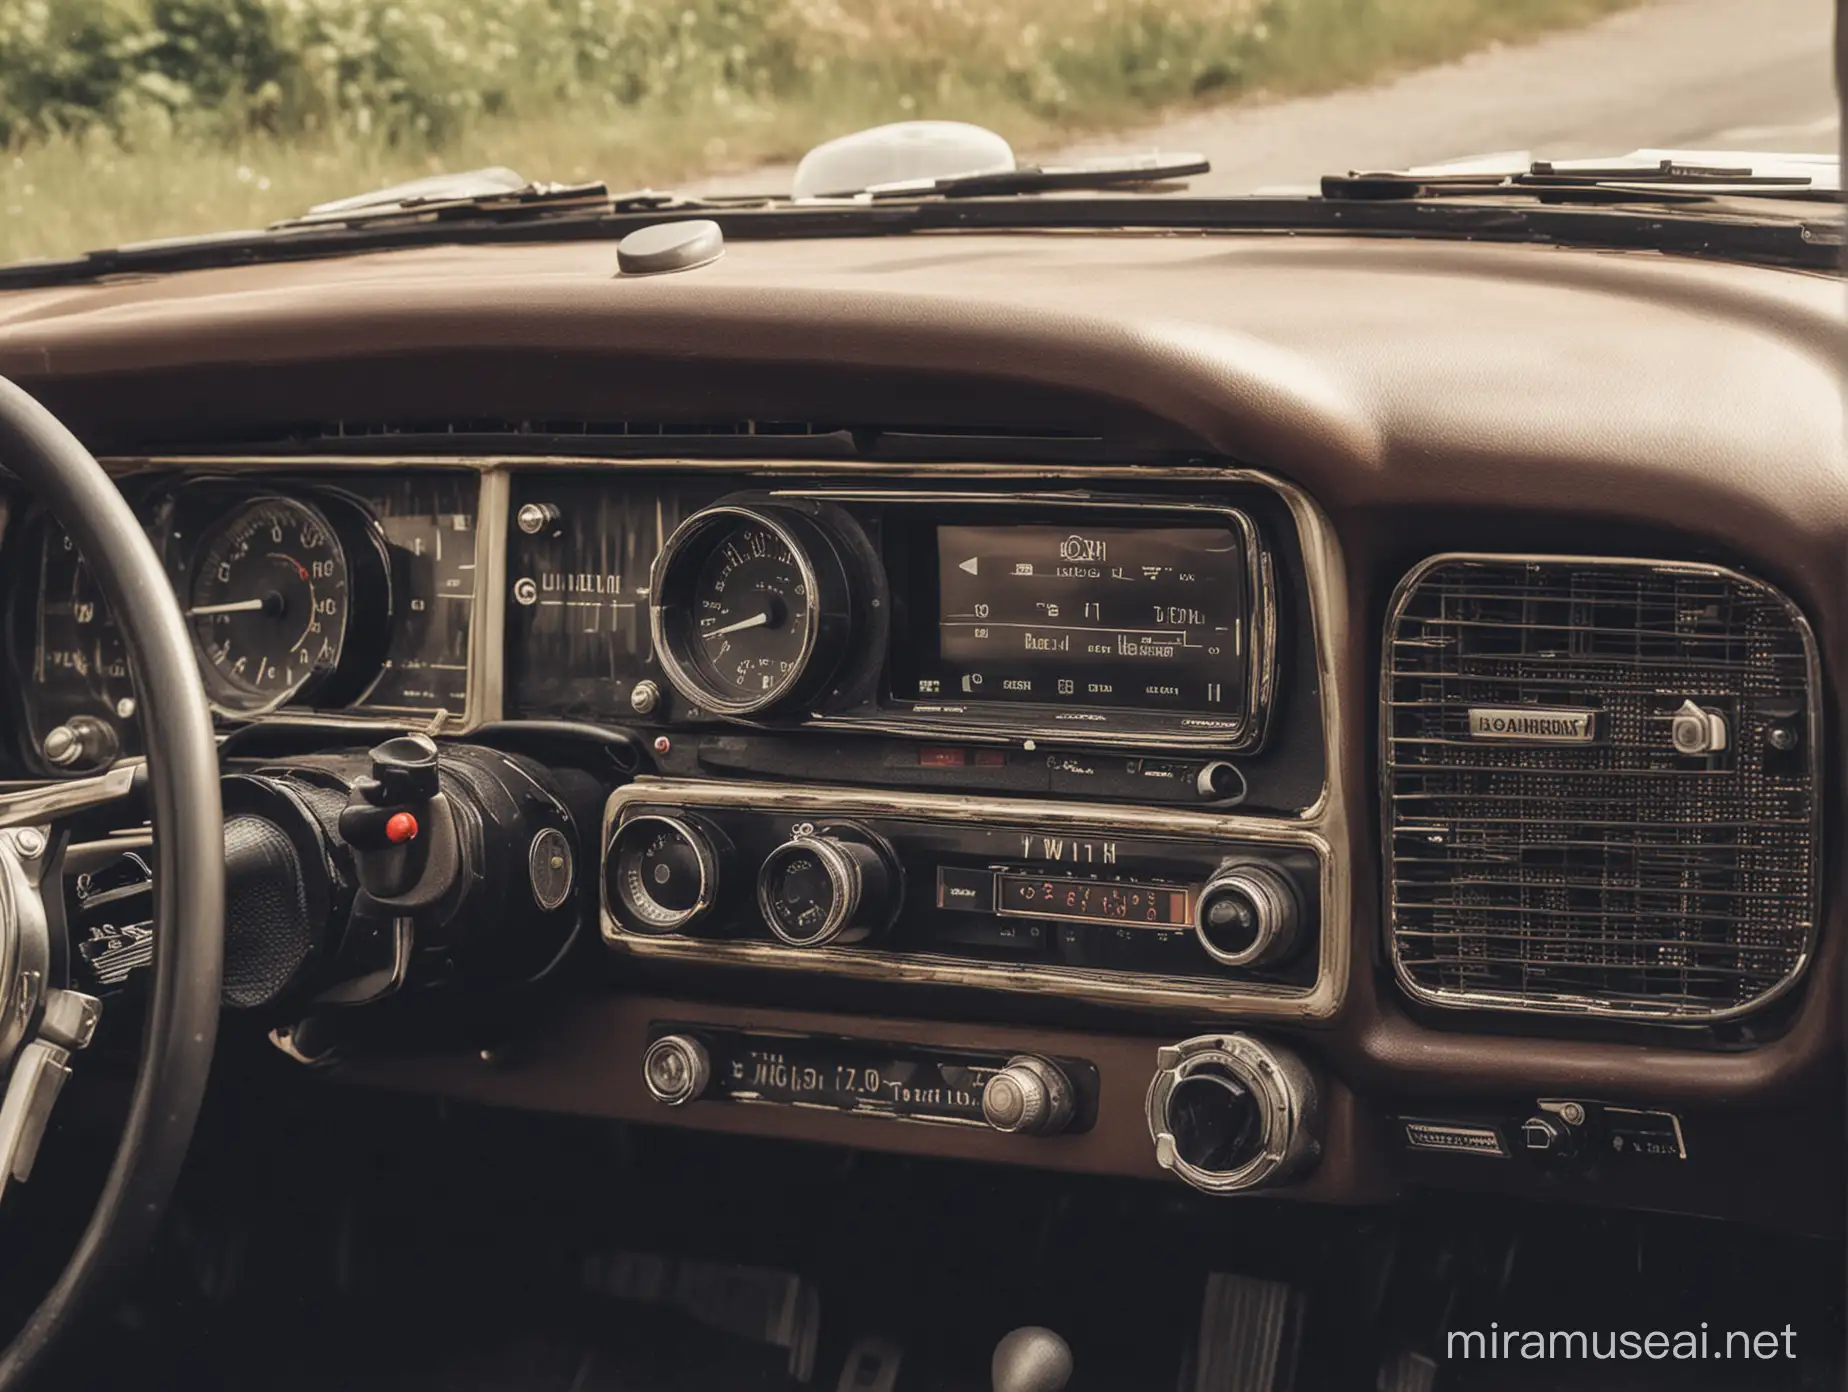 Inside a car, the dashboard is half vintage wirth an old radio receiver FM and half is futuritic, with radio streaming receiver and video screen.